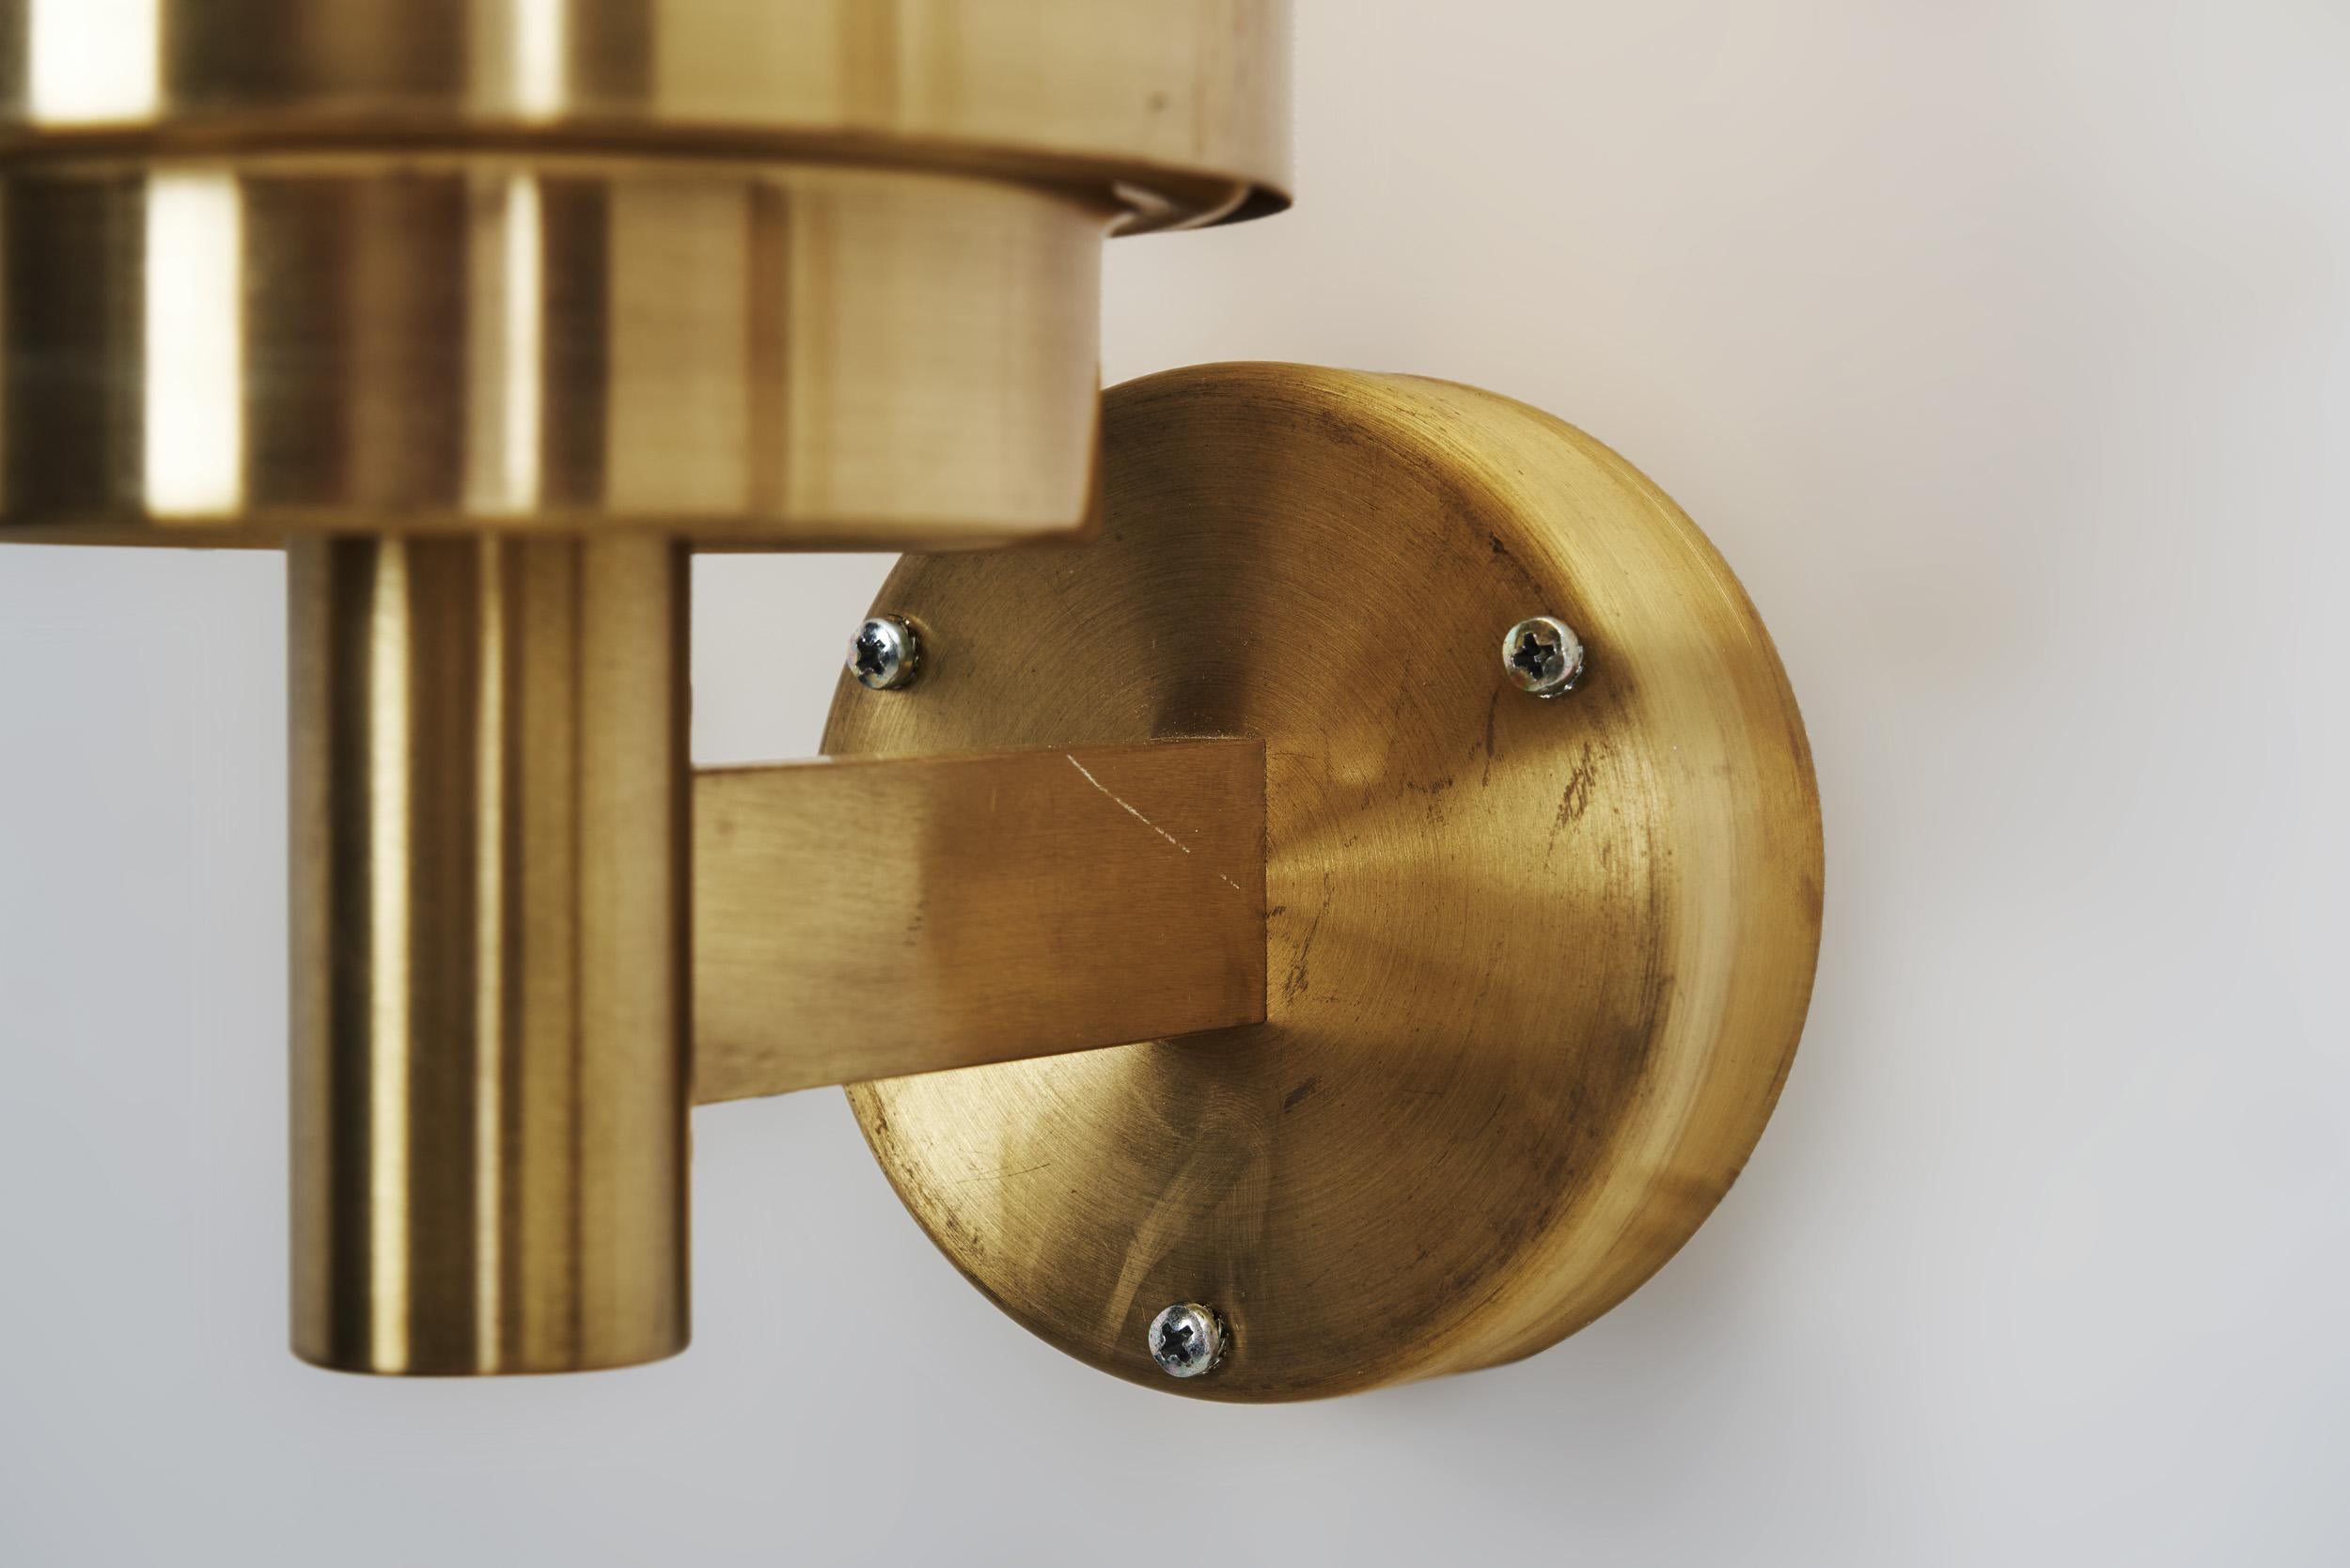 Brass and Acrylic Glass Wall Lamps by Stockmann Orno, Finland 1960s For Sale 11